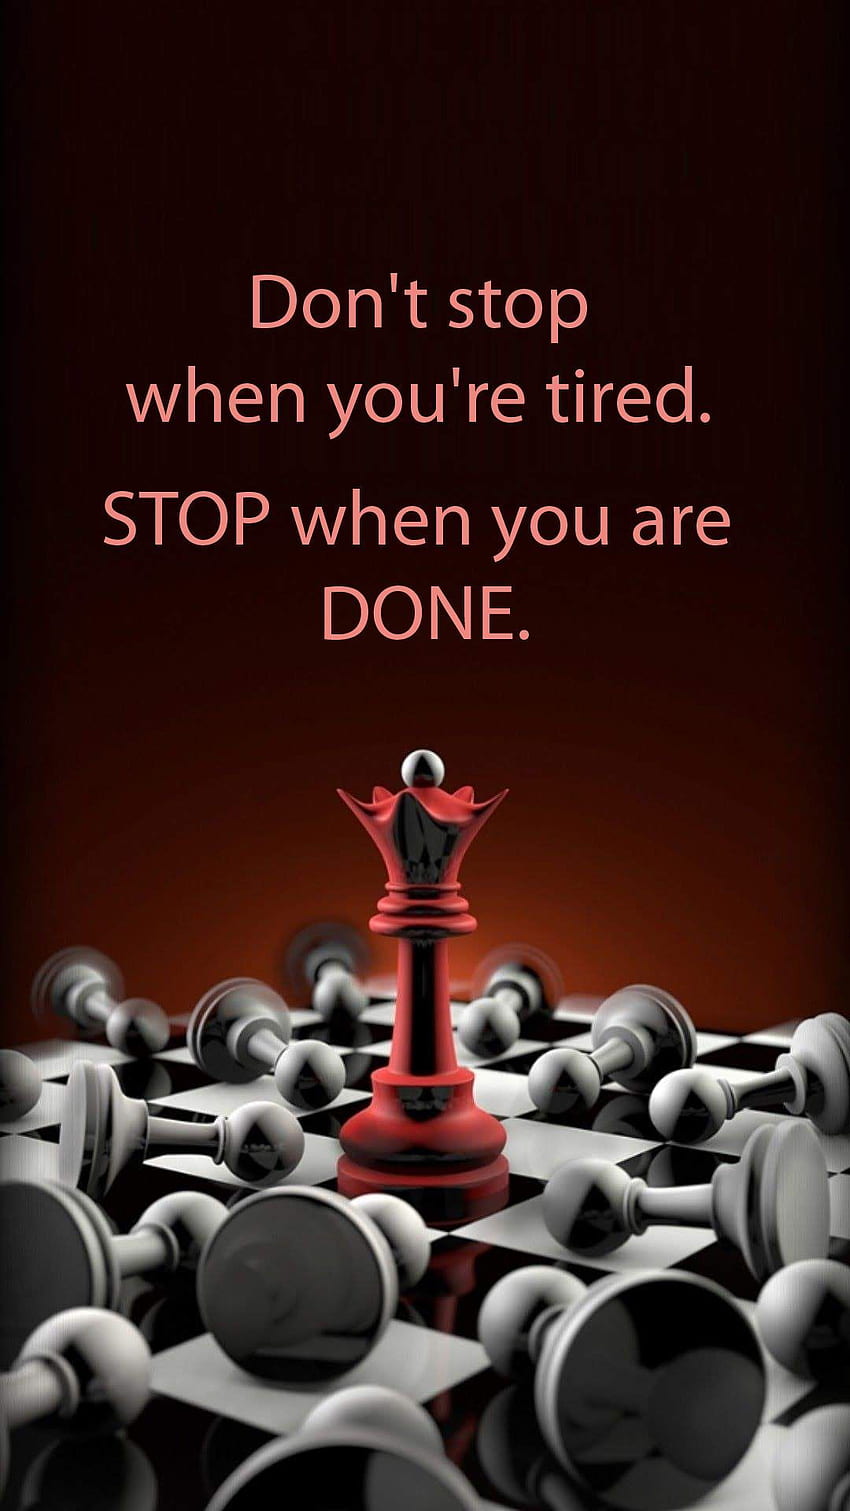 Don't stop when you're tired. STOP when you are DONE.” This HD phone wallpaper